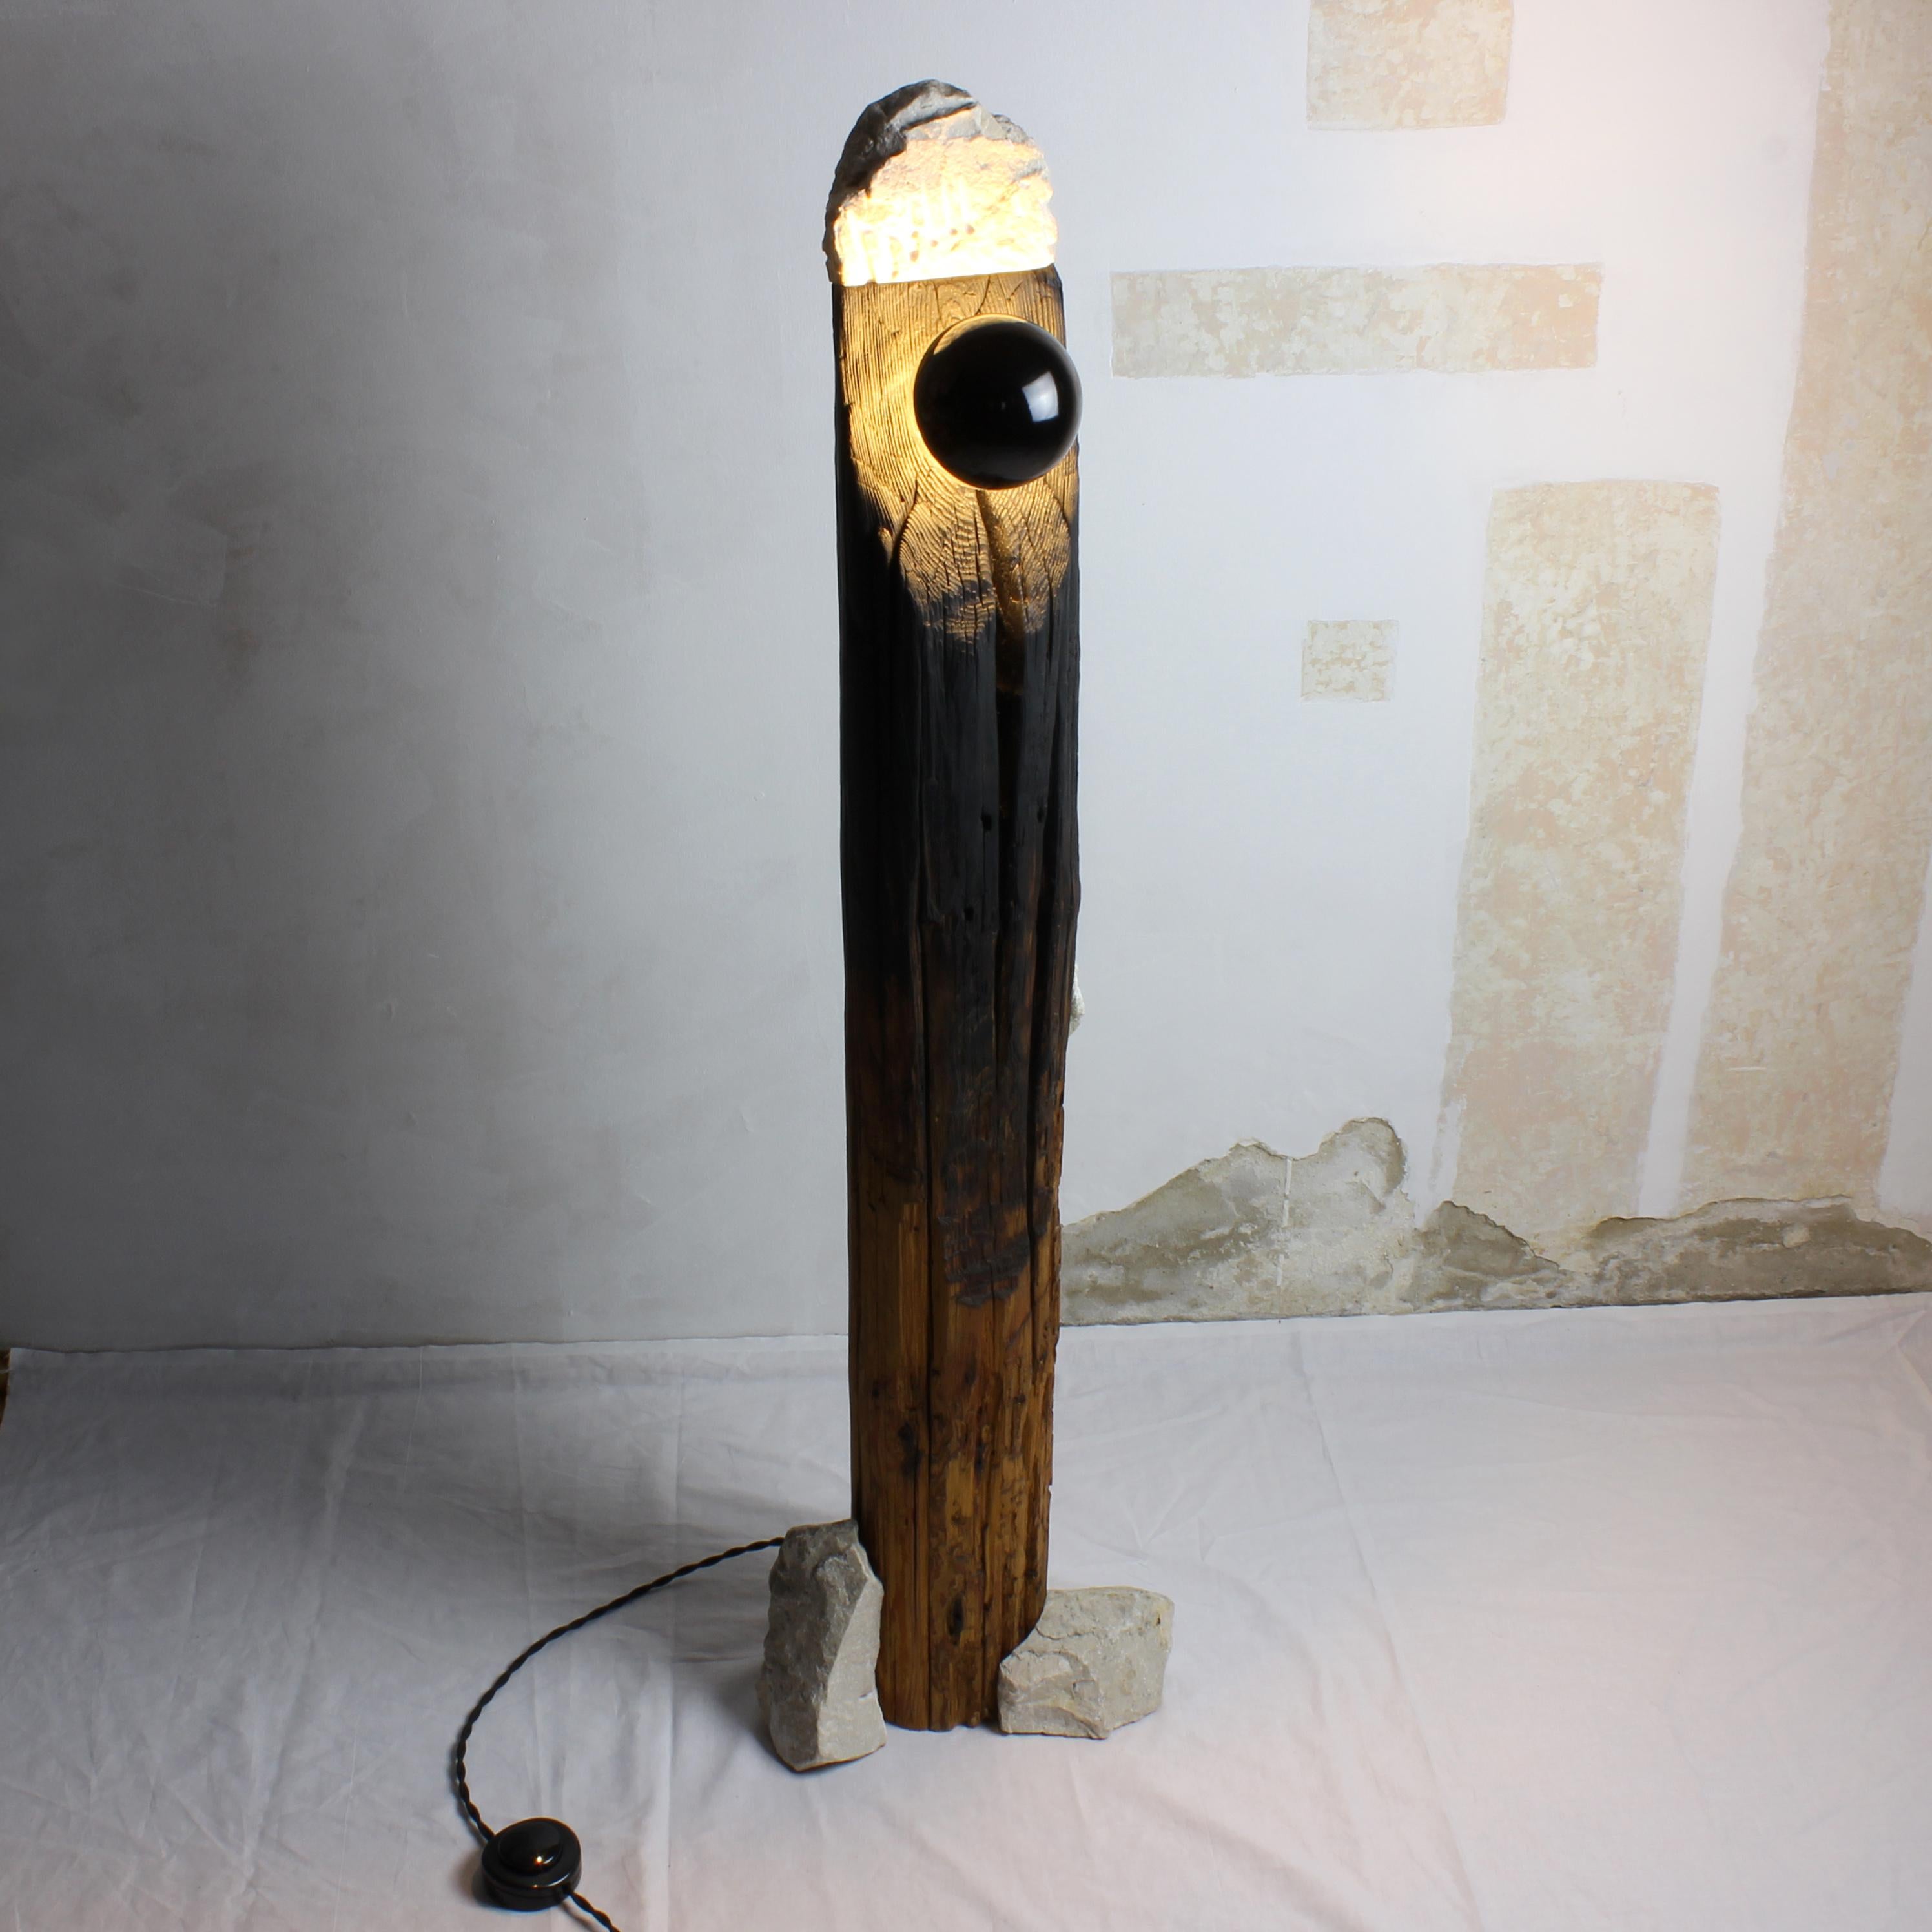 Collectible art sculpture mood lighting, one of a kind floor lamp, is made from repurposed wood column and leftover white stone. The wiring is new. Creating new objects from these materials are the real challenge and joy. This sculptural lamp is